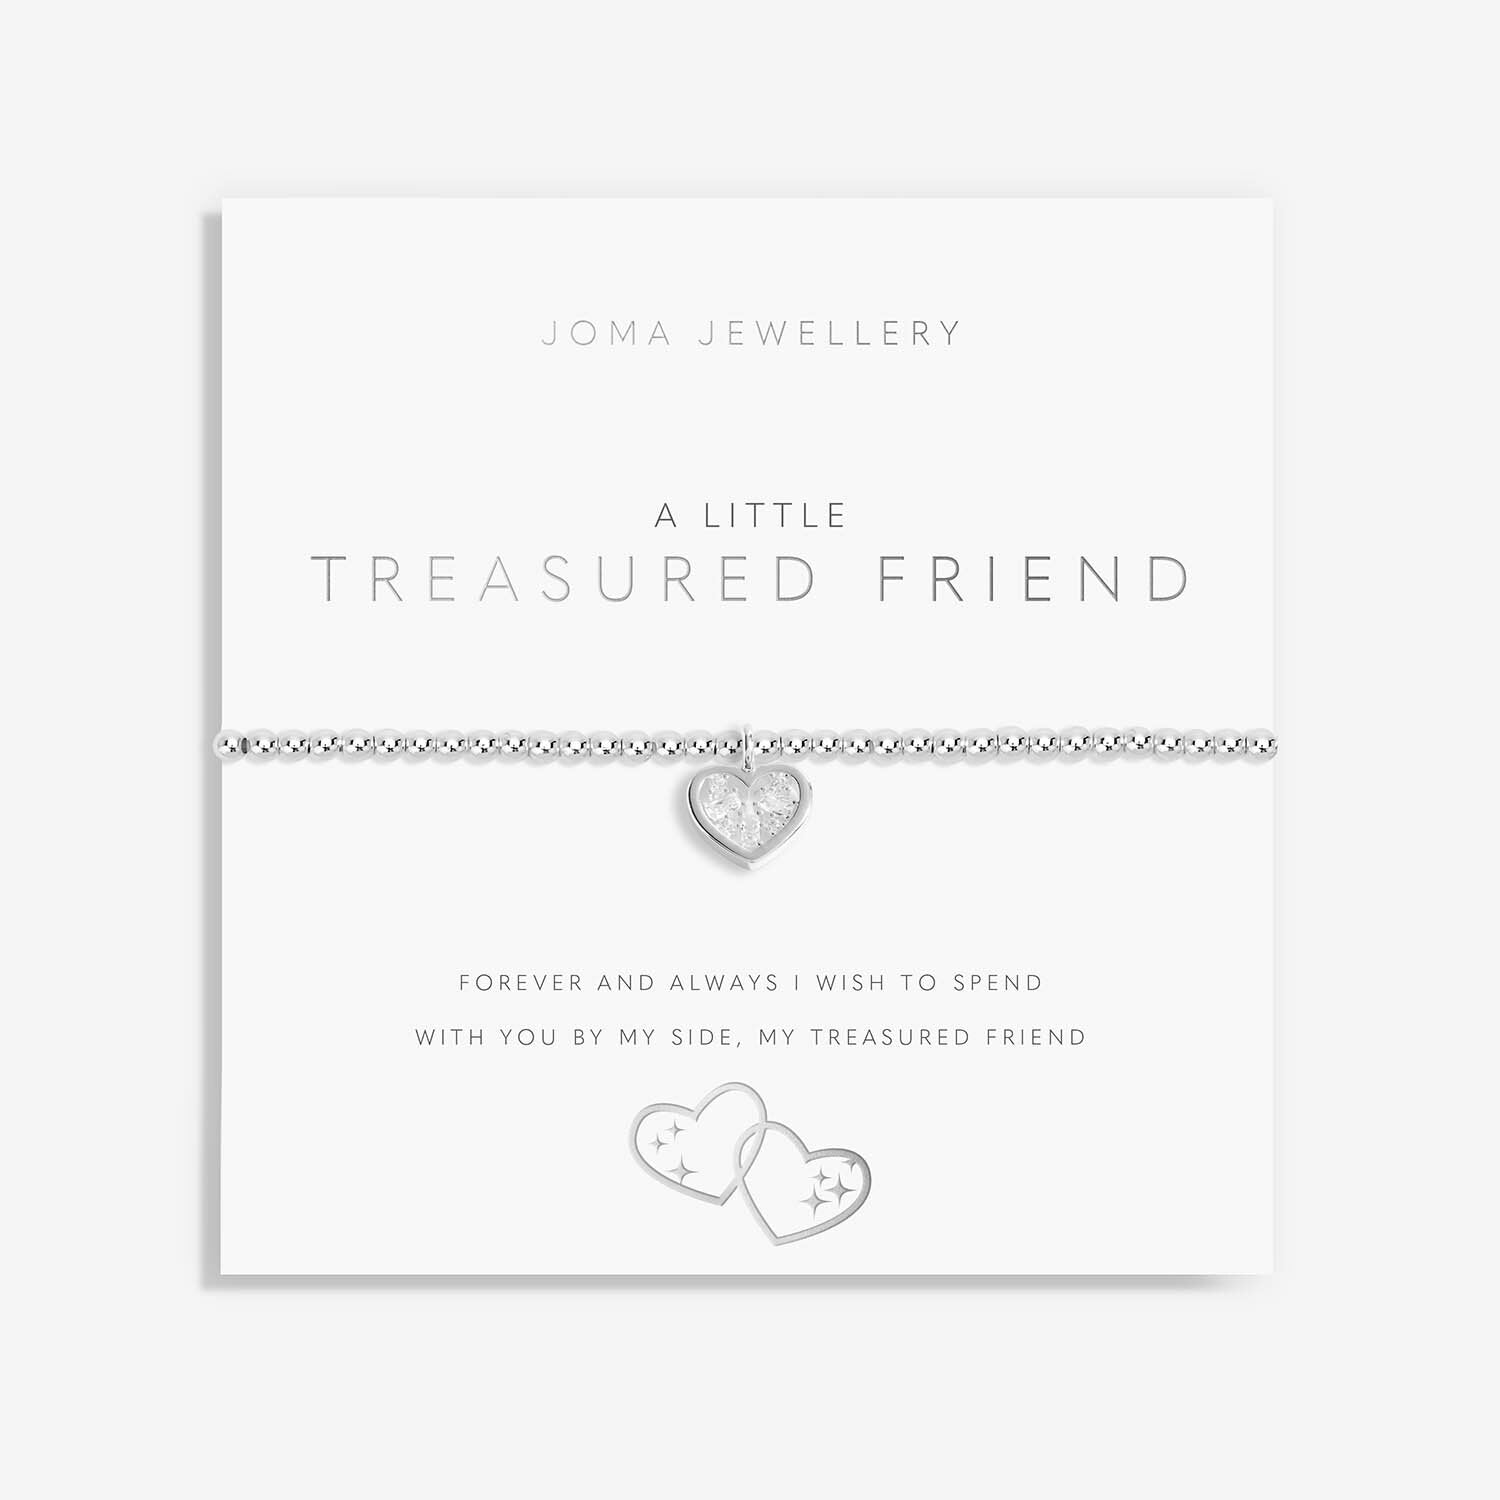 Joma Jewellery A Little 'Treasured Friend Bracelet |More Than Just A Gift